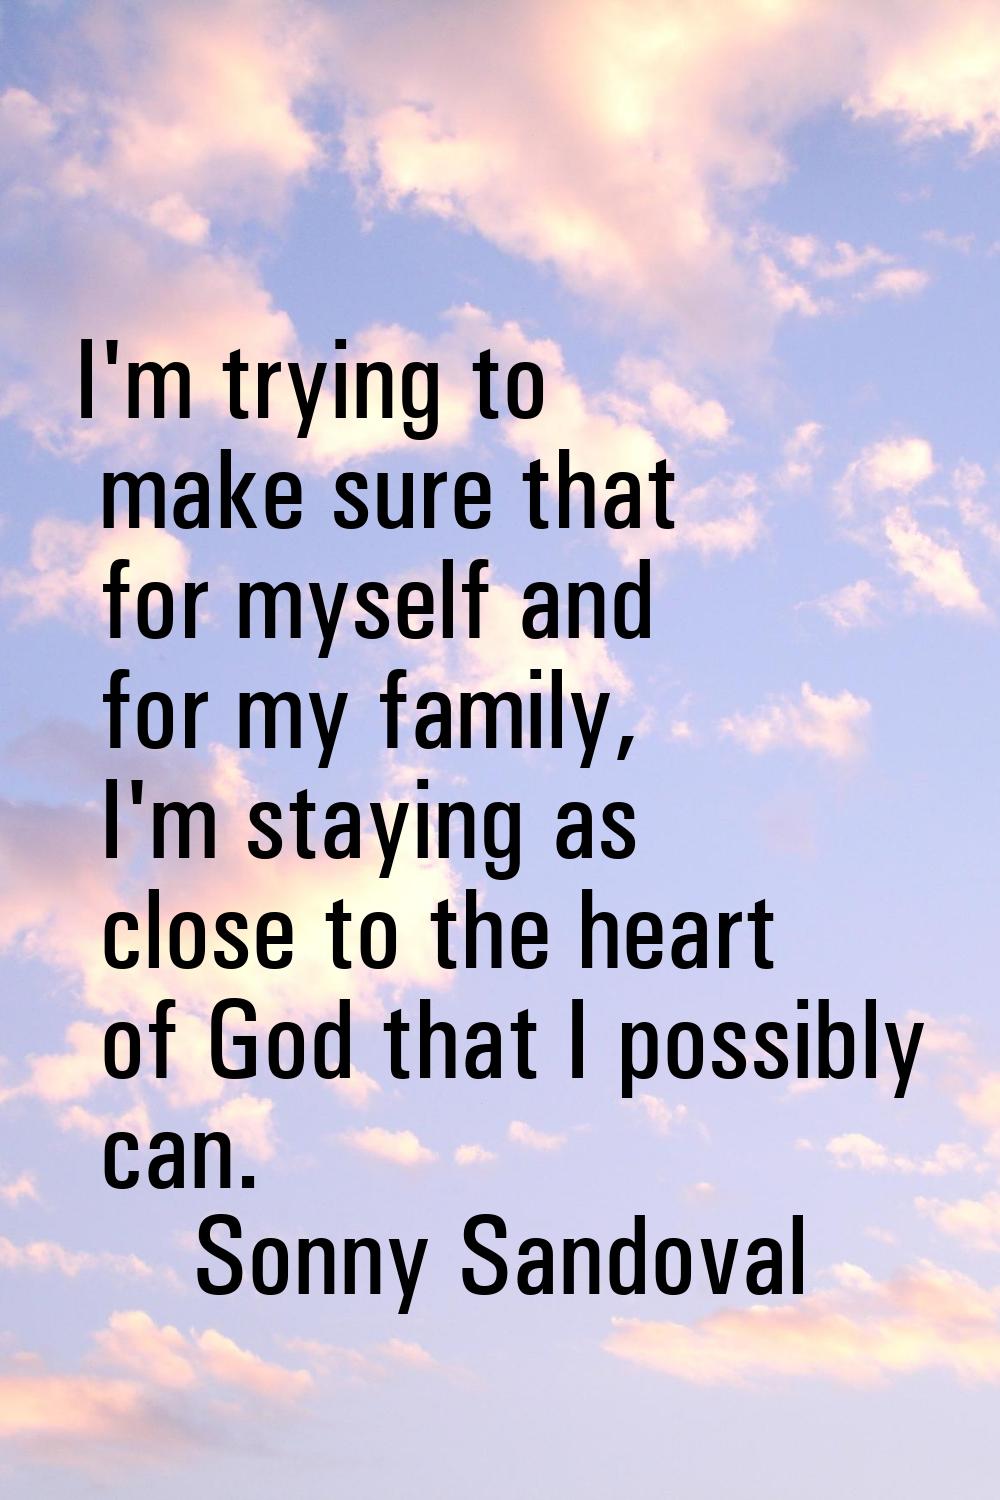 I'm trying to make sure that for myself and for my family, I'm staying as close to the heart of God